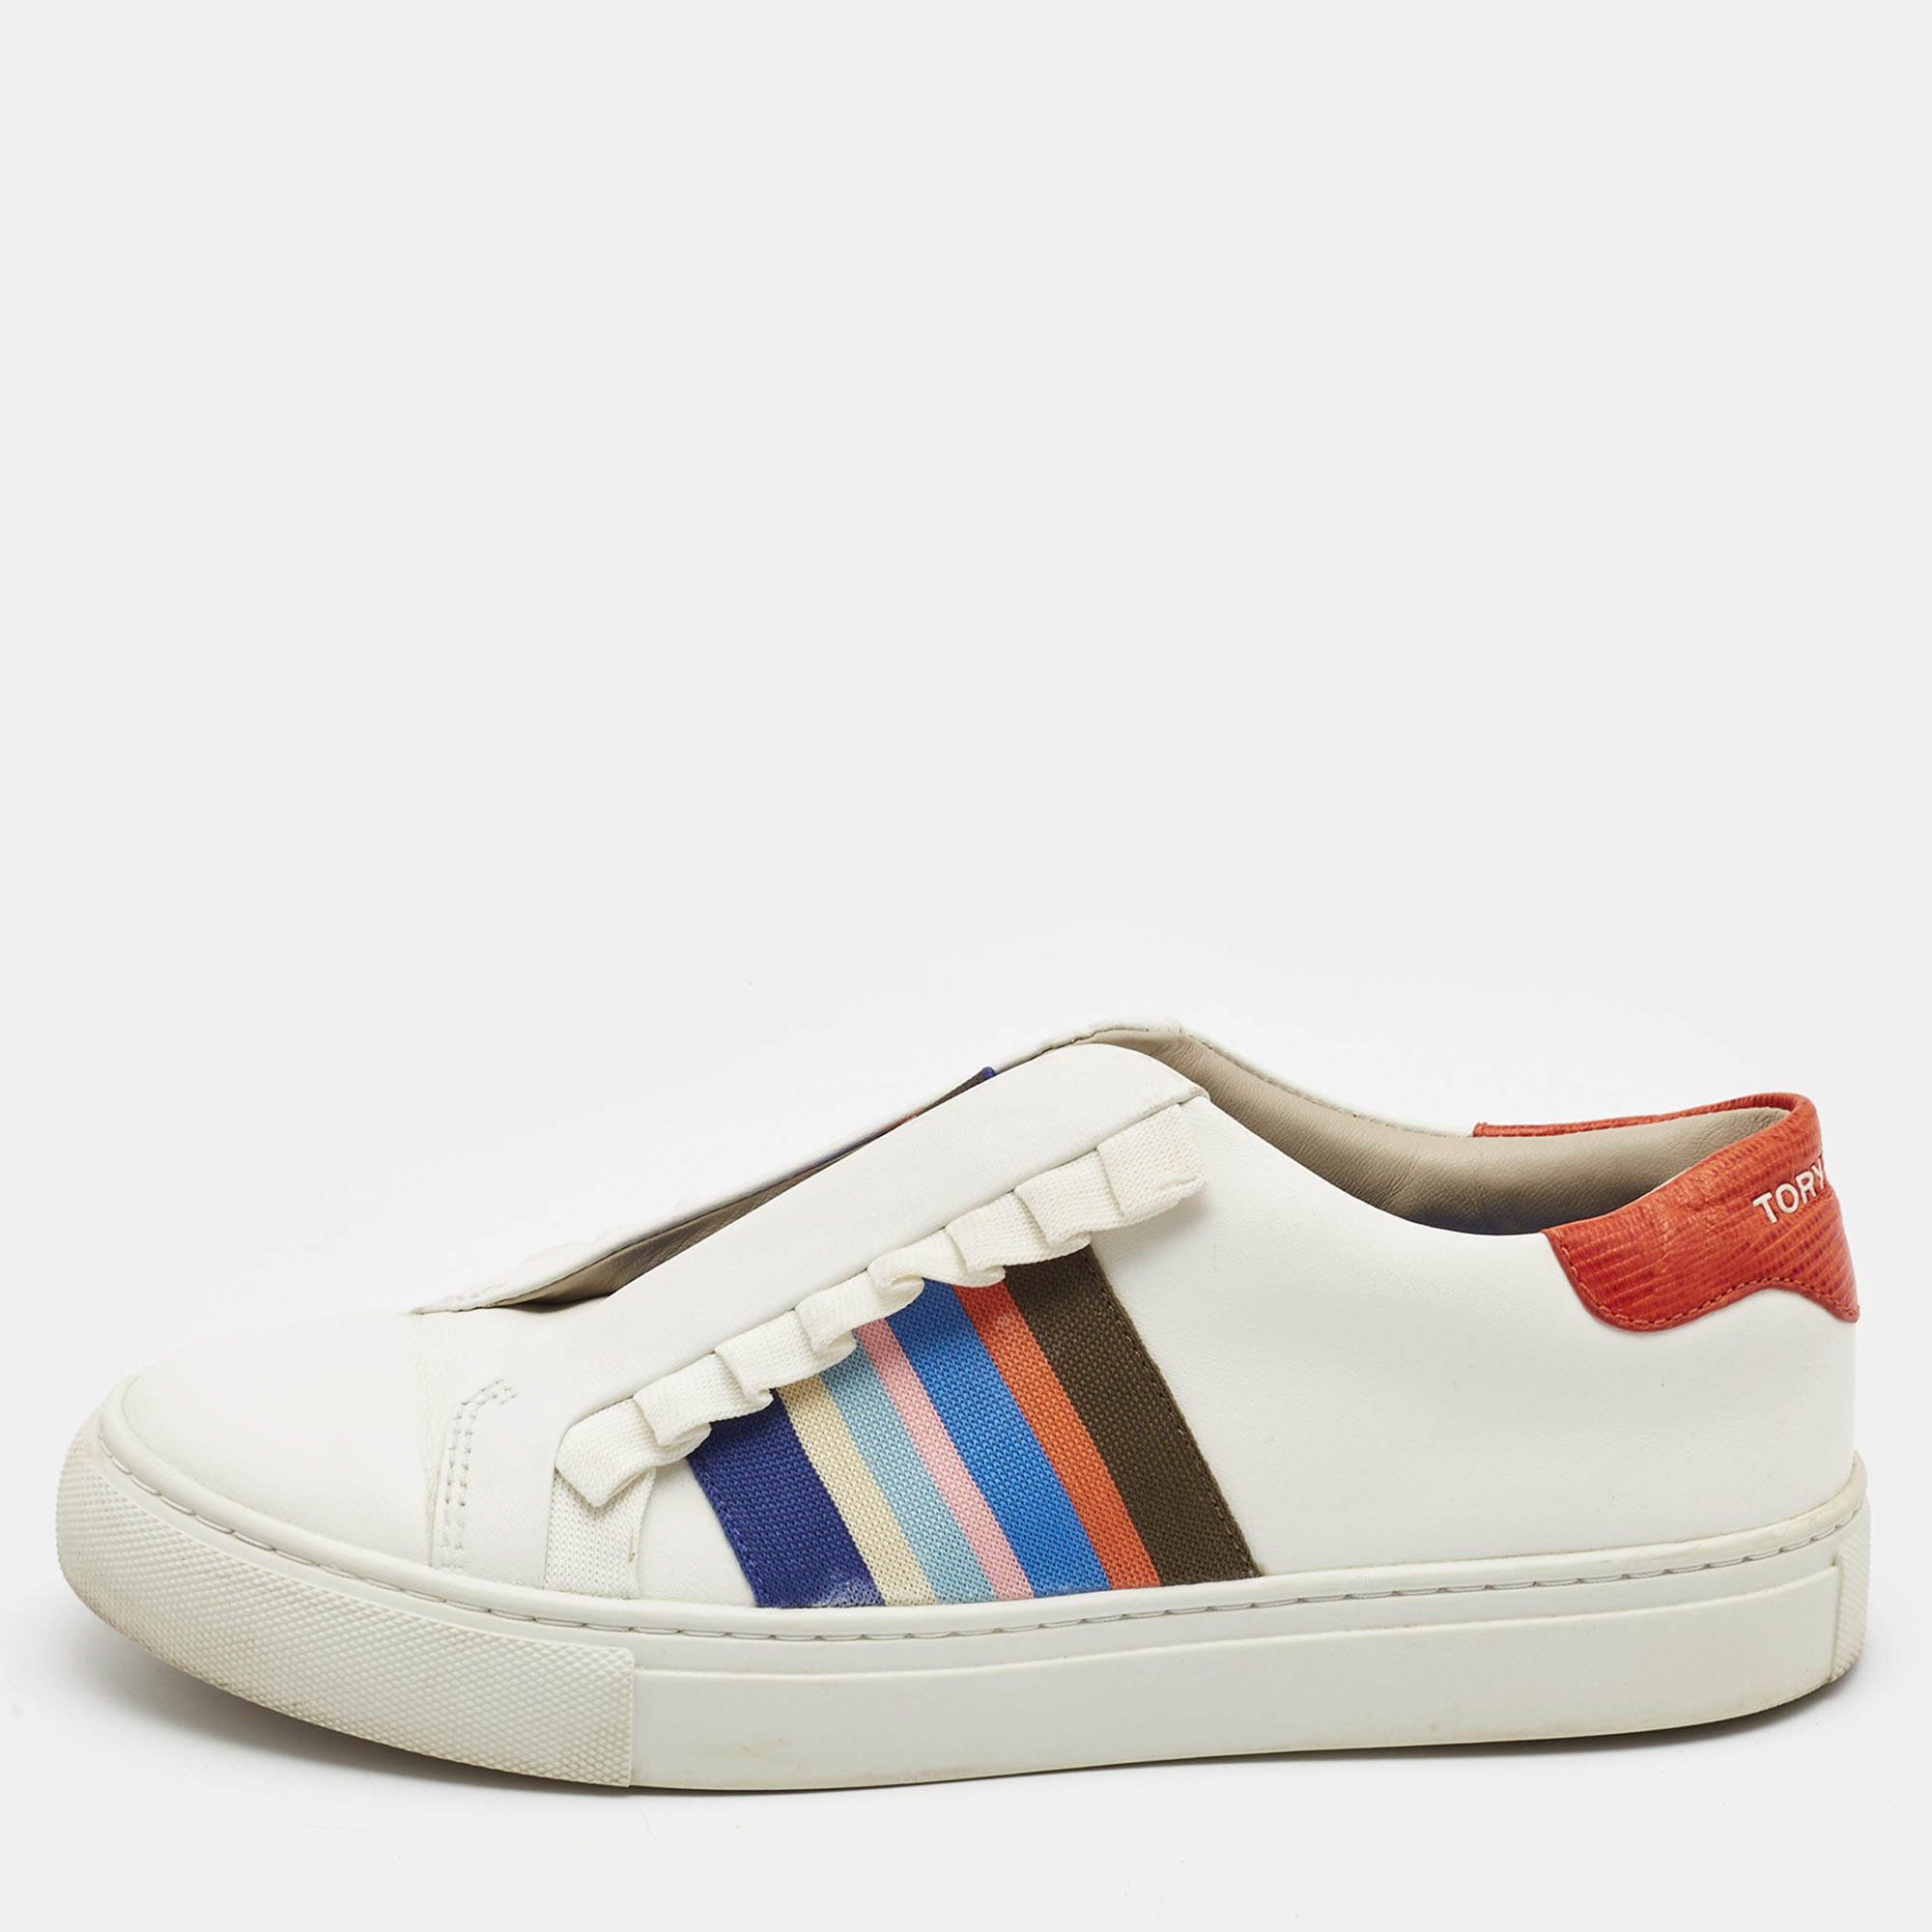 Tory Burch Multicolor Leather Rainbow Strap Sneakers Size  Tory Burch |  TLC